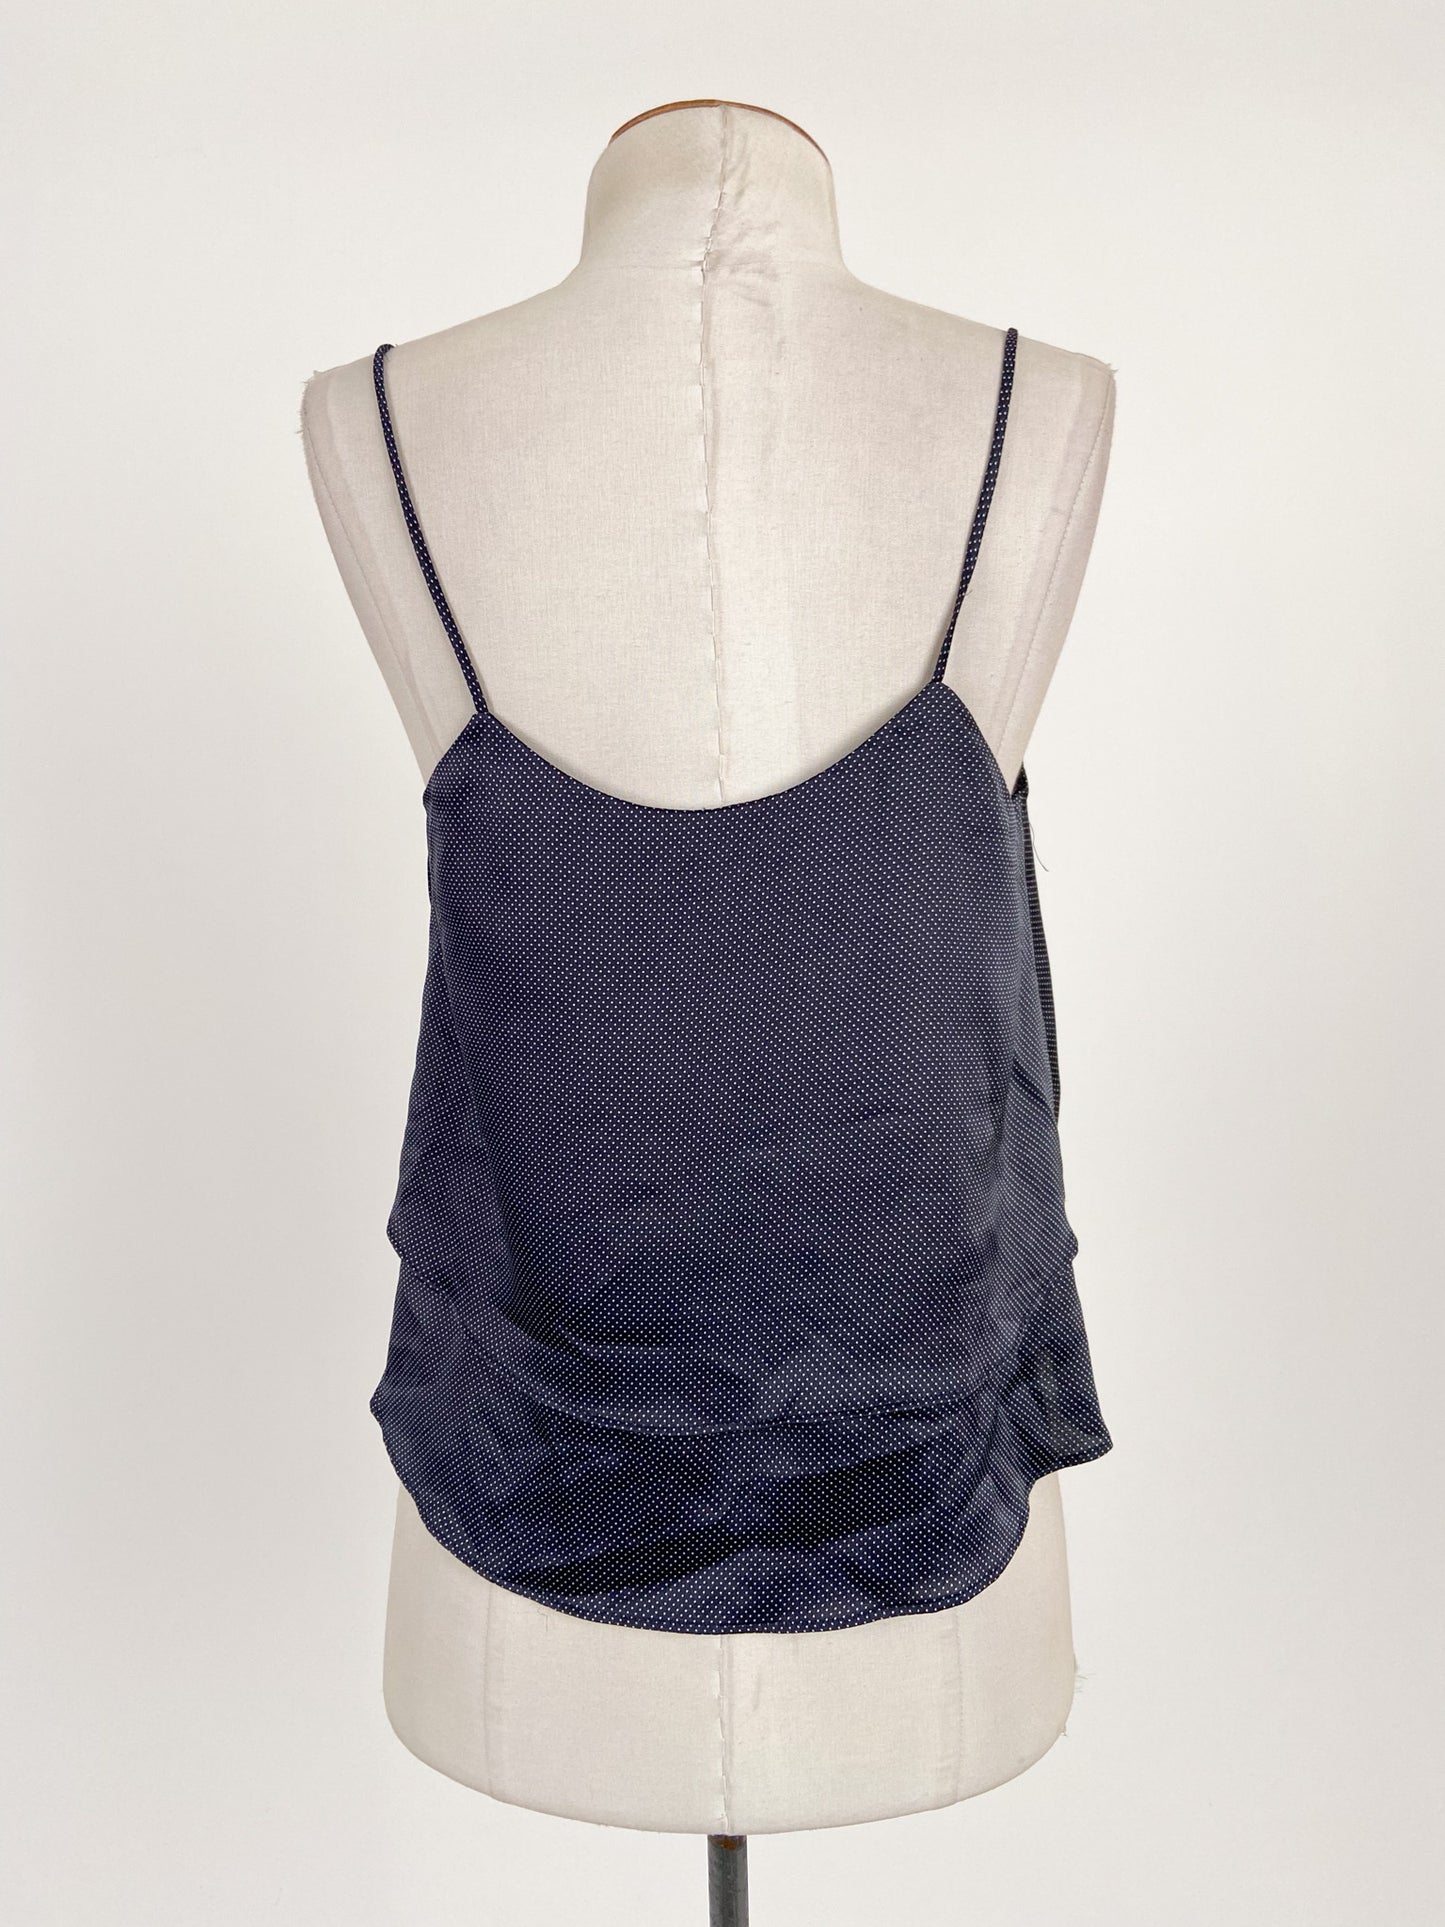 Mango | Navy Casual Top | Size XS